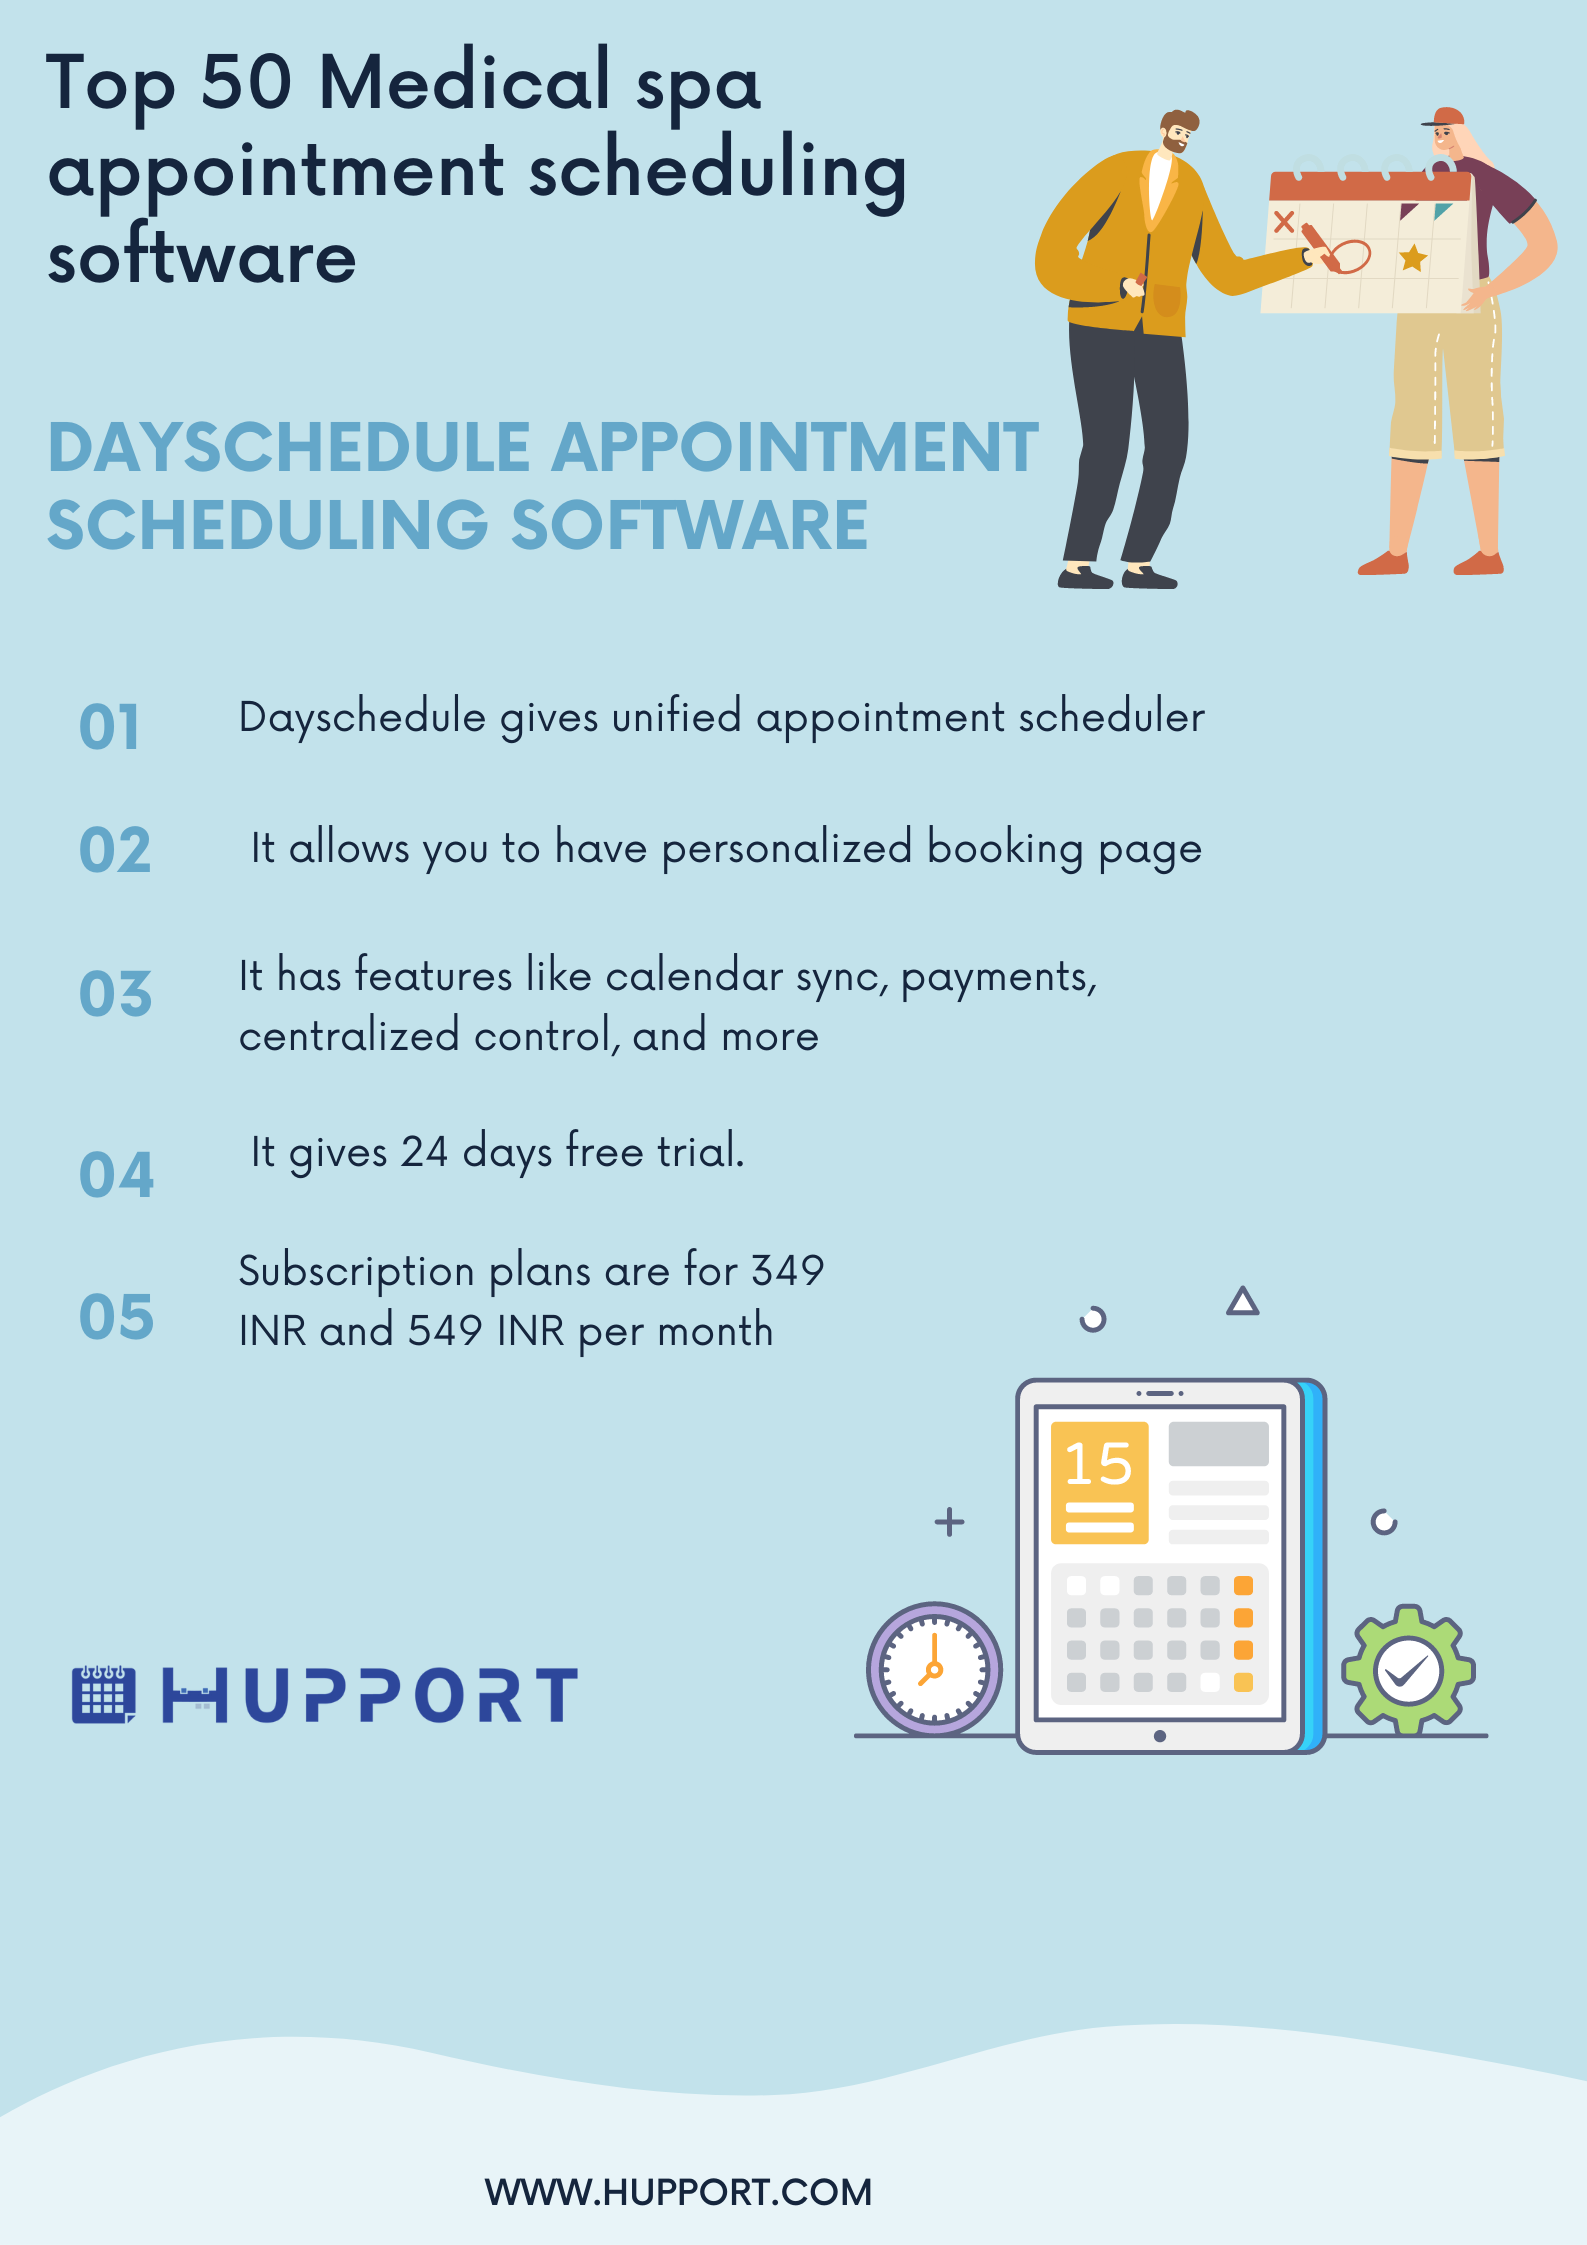 Dayschedule appointment scheduling software